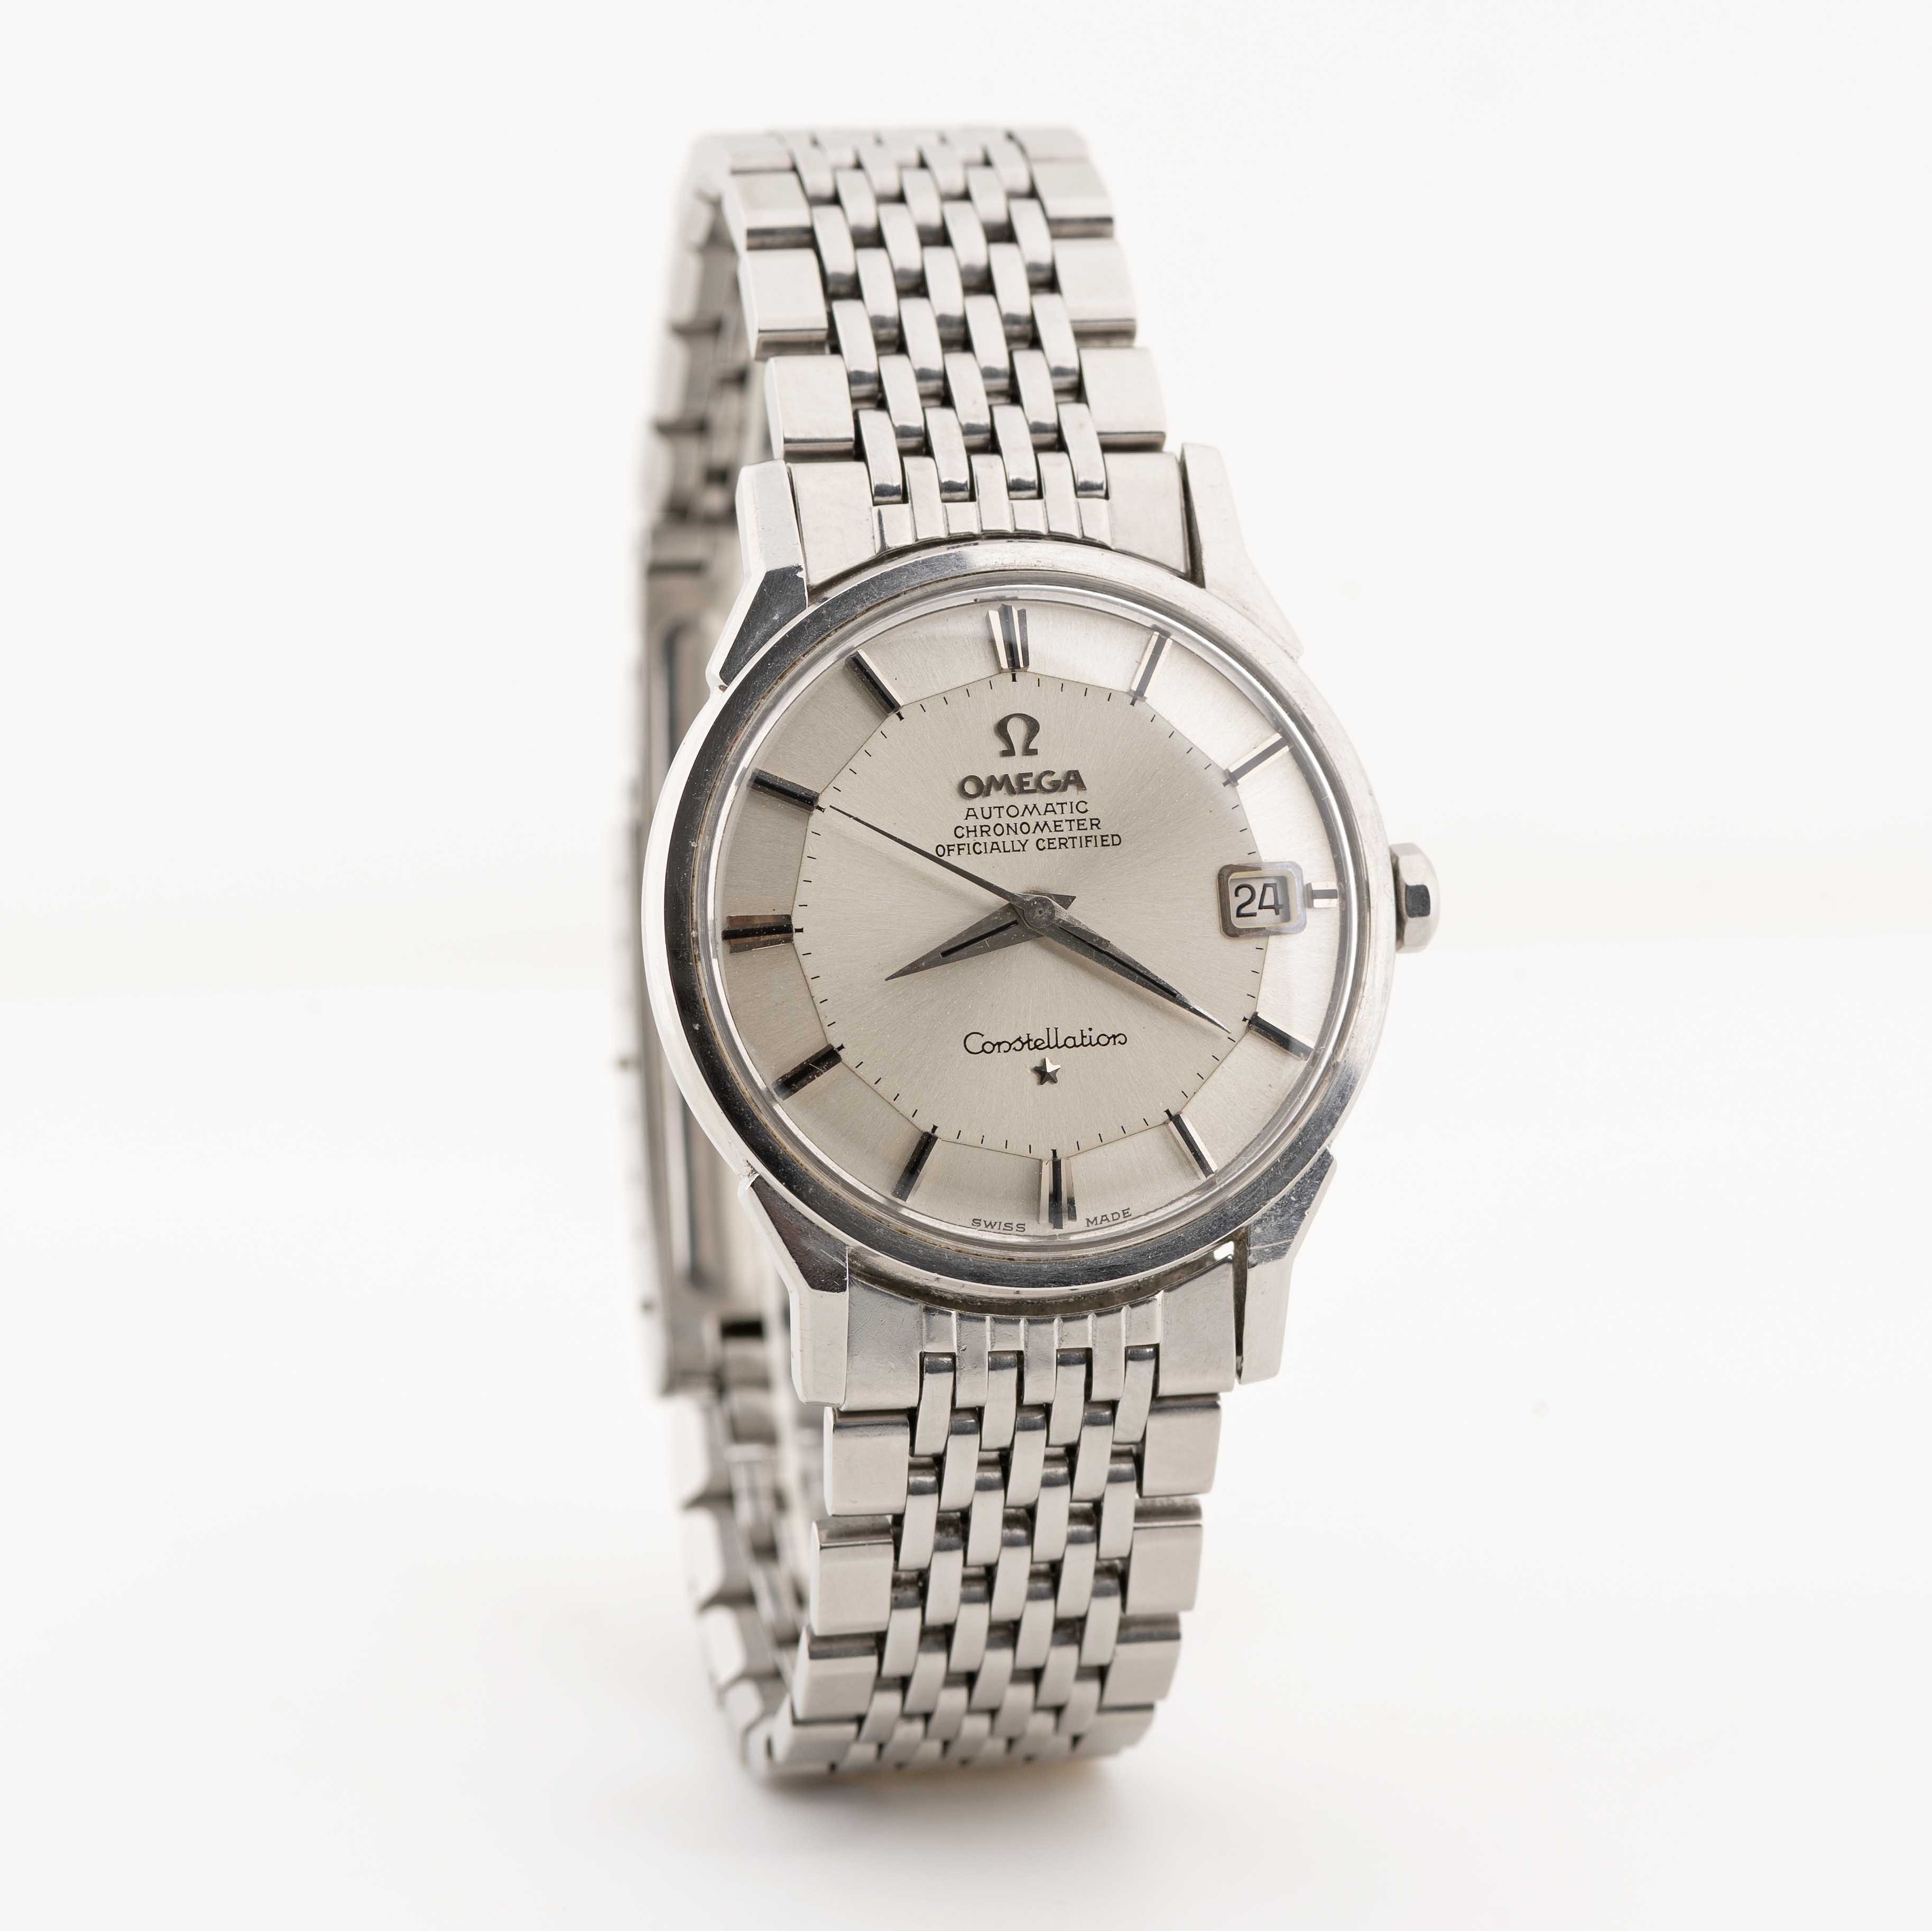 A GENTLEMAN'S STAINLESS STEEL OMEGA CONSTELLATION CHRONOMETER BRACELET WATCH CIRCA 1963, REF. 168. - Image 5 of 11